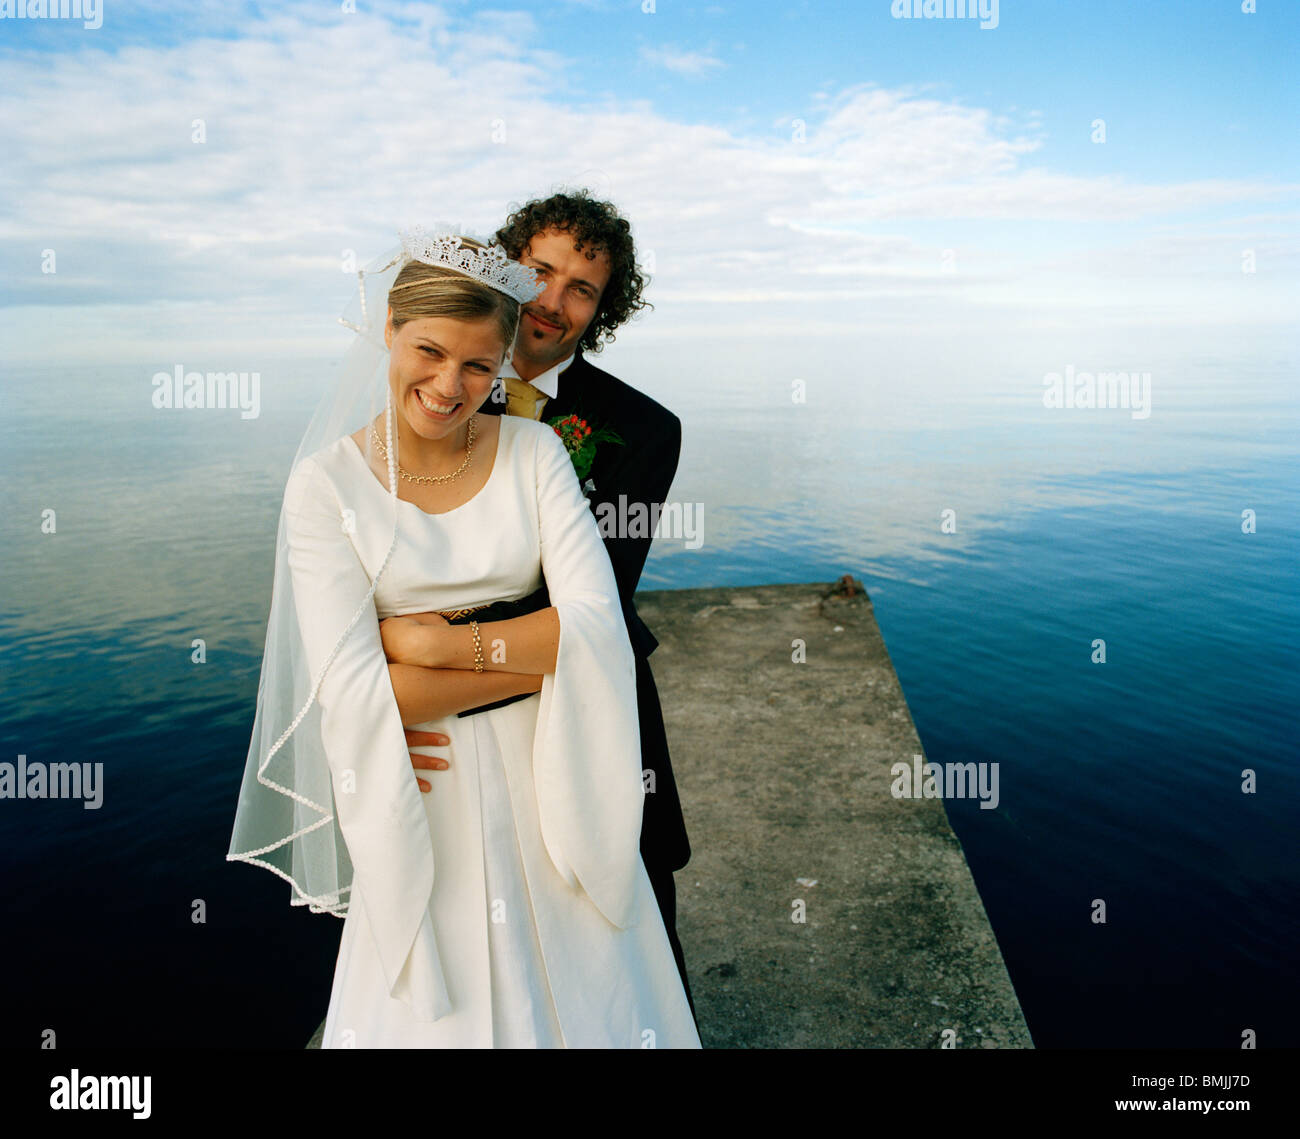 Scandinavia, Sweden, Oland, Groom and bride embracing on jetty, smiling, portrait Stock Photo